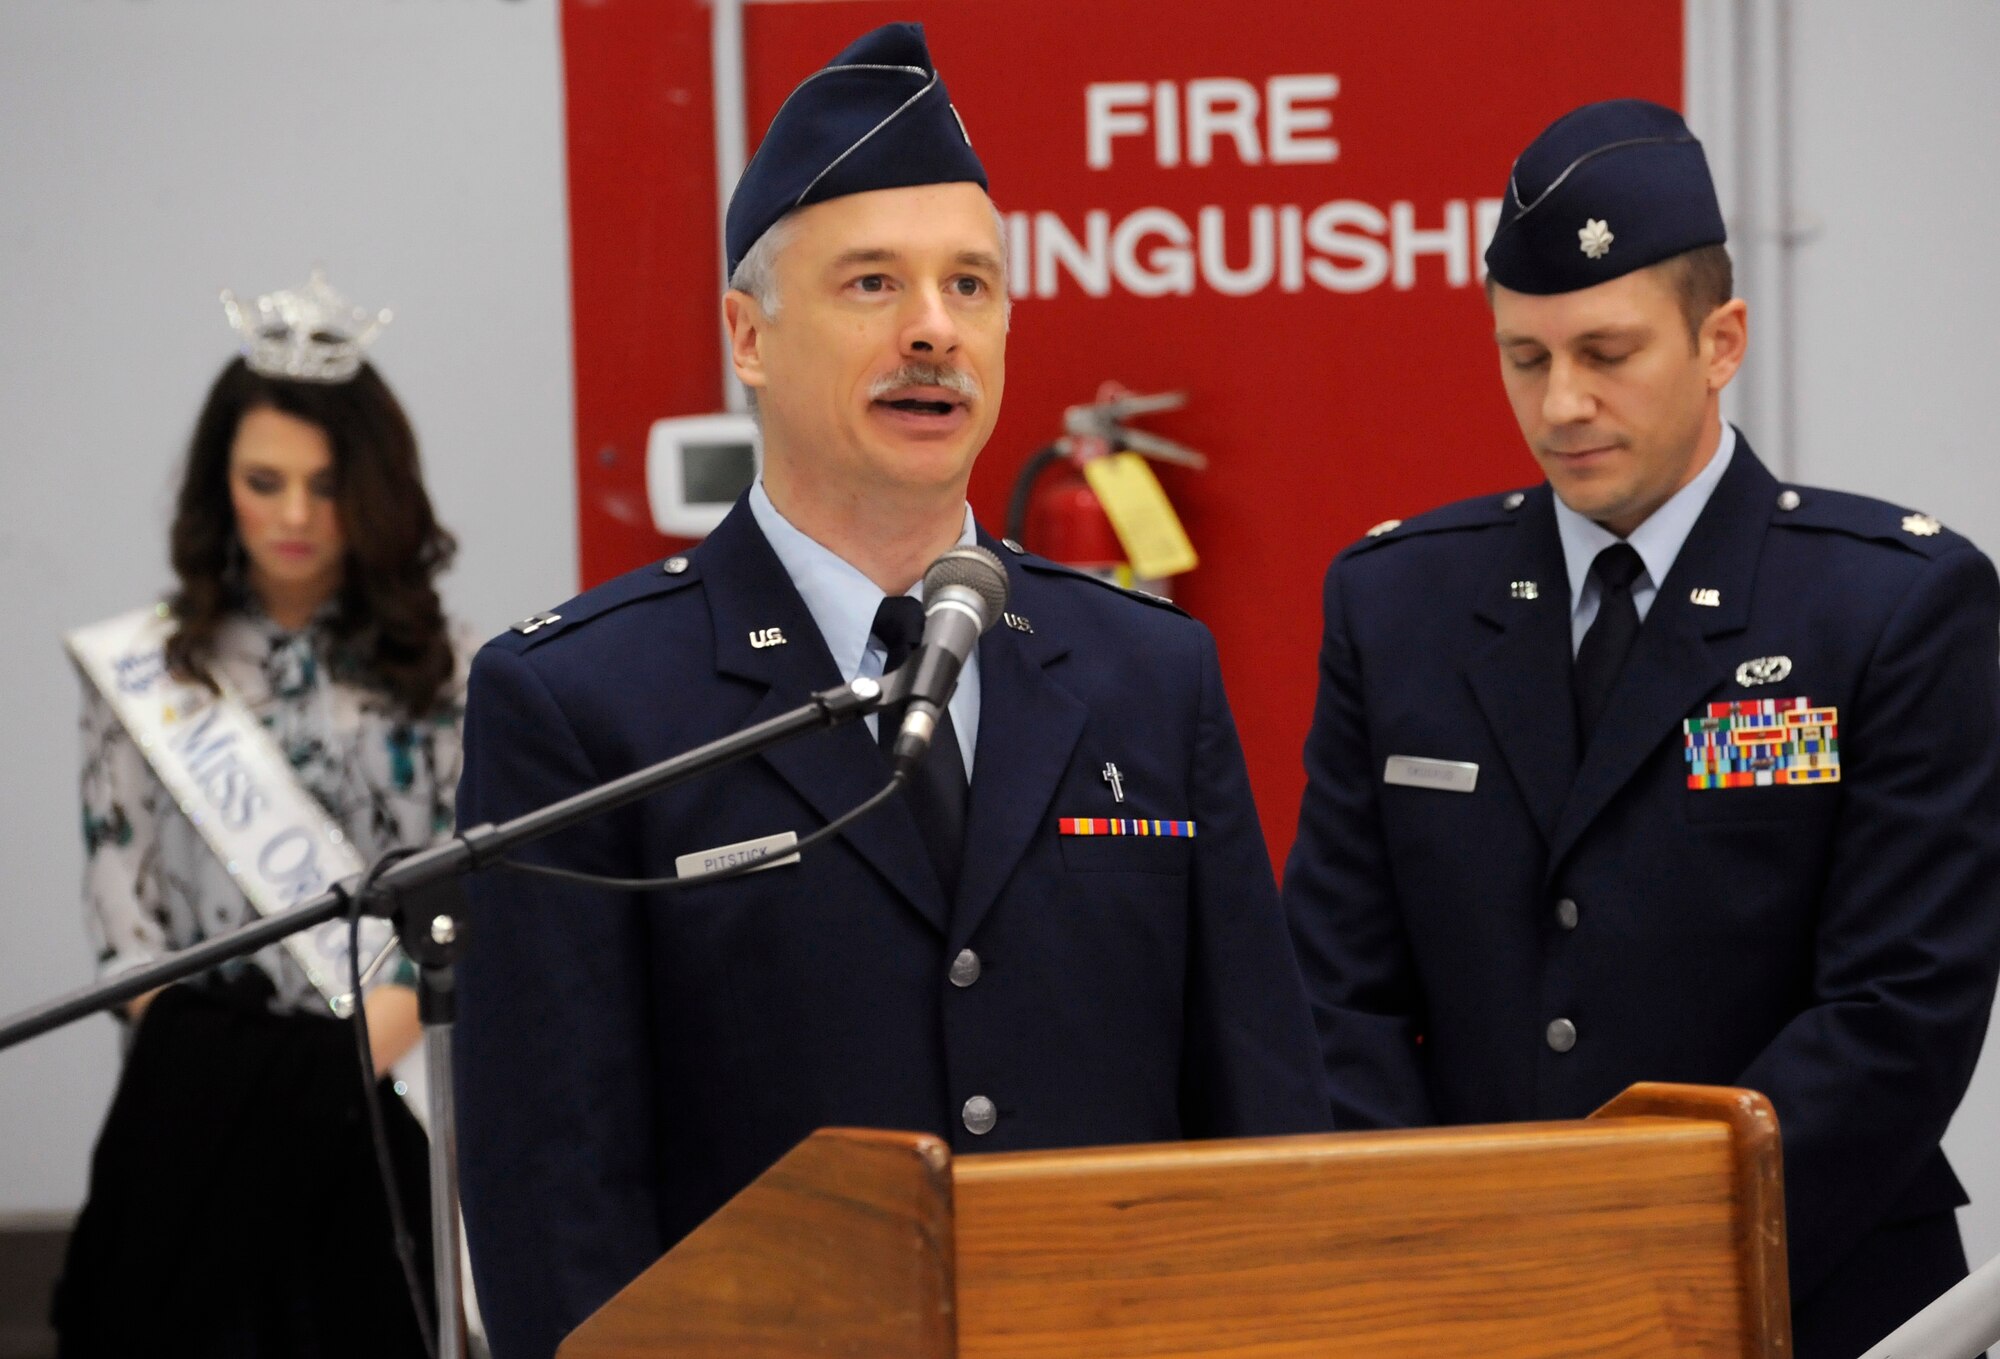 Capt. Rory Pitstick, 142nd Fighter Wing Chaplin, delivers the invocation at the Demobilization Ceremony for the 142nd Fighter Wing Civil Engineer Squadron and Security Forces Squadron at the Portland Air National Guard Base, Ore., Dec. 7, 2014. (U.S. Air National Guard photo by Tech. Sgt. John Hughel, 142nd Fighter Wing Public Affairs/Released))